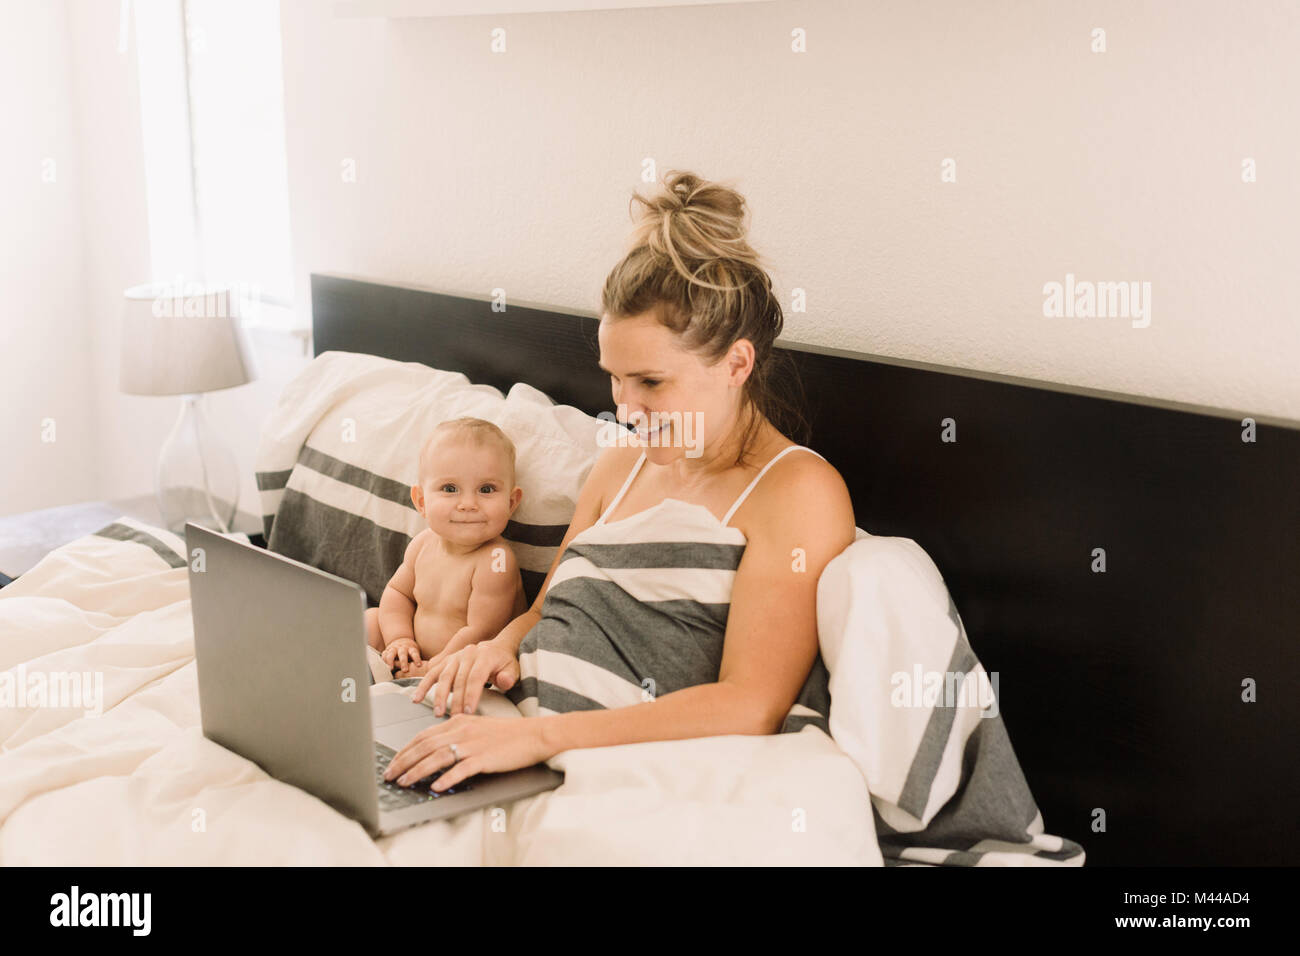 Portrait of cute baby girl sitting up in bed while mother using laptop Stock Photo